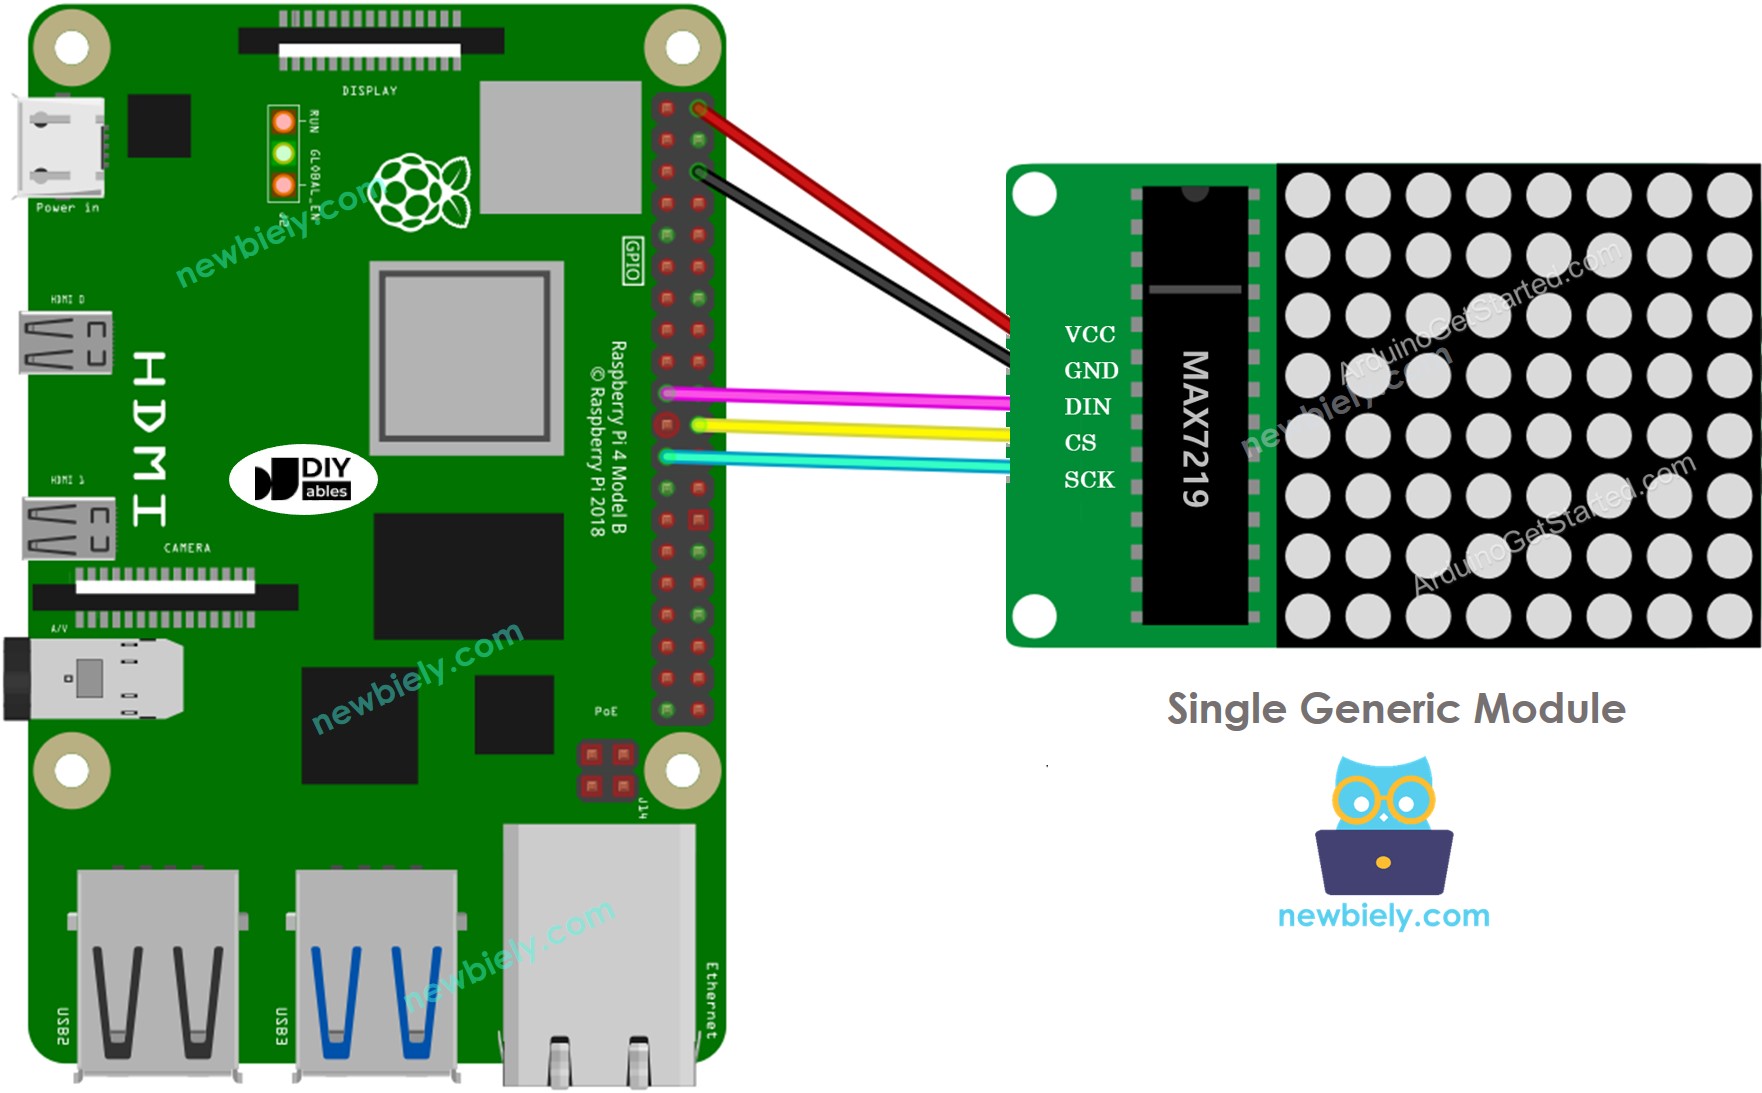 The wiring diagram between Raspberry Pi and 8x8 LED matrix generic